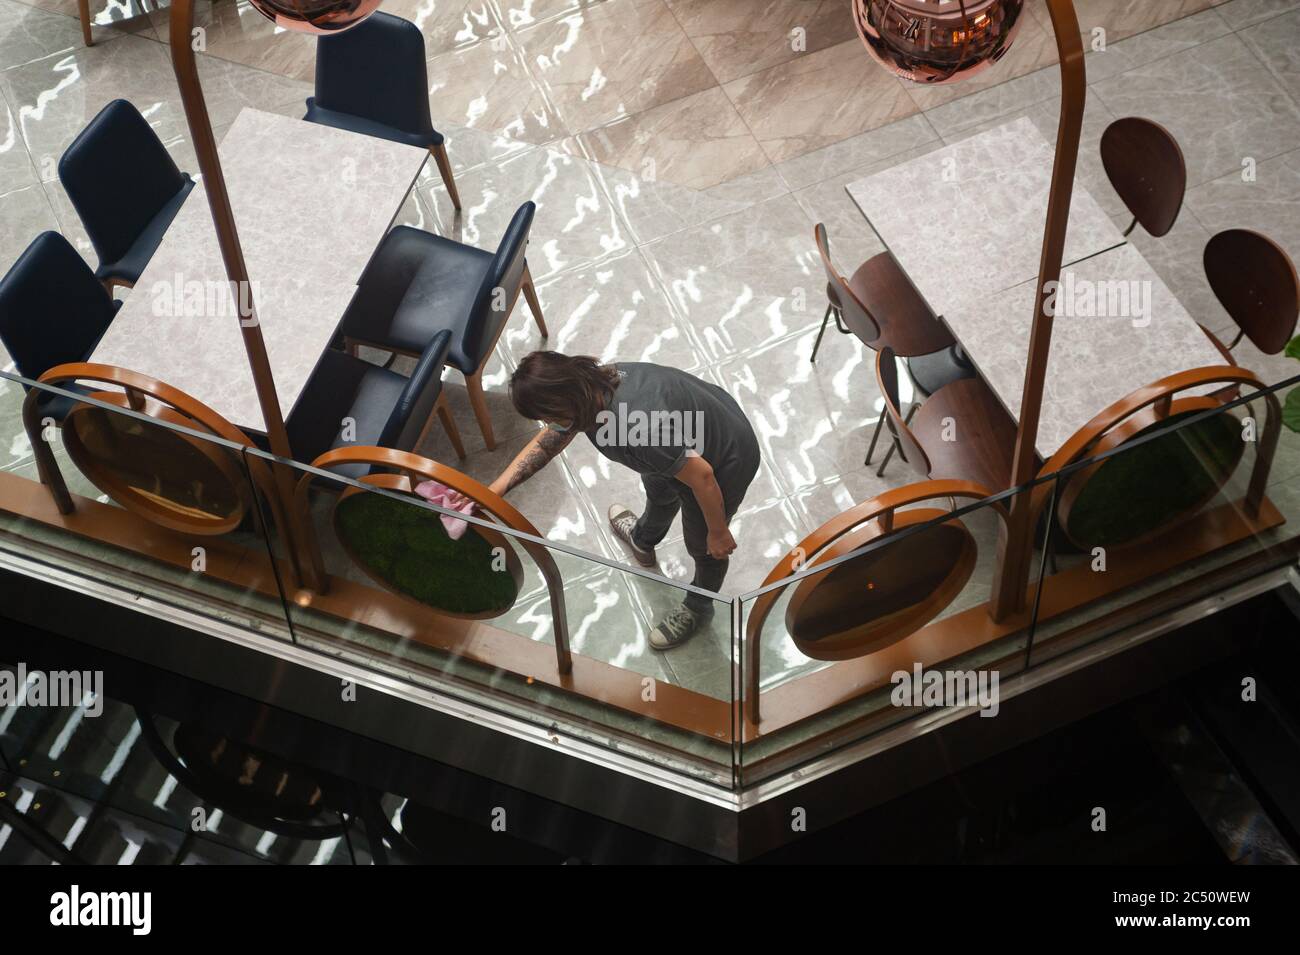 25.06.2020, Singapore, Republic of Singapore, Asia - A staff member cleans the furnishing at a cafe inside the Marina Bay Sands shopping mall. Stock Photo